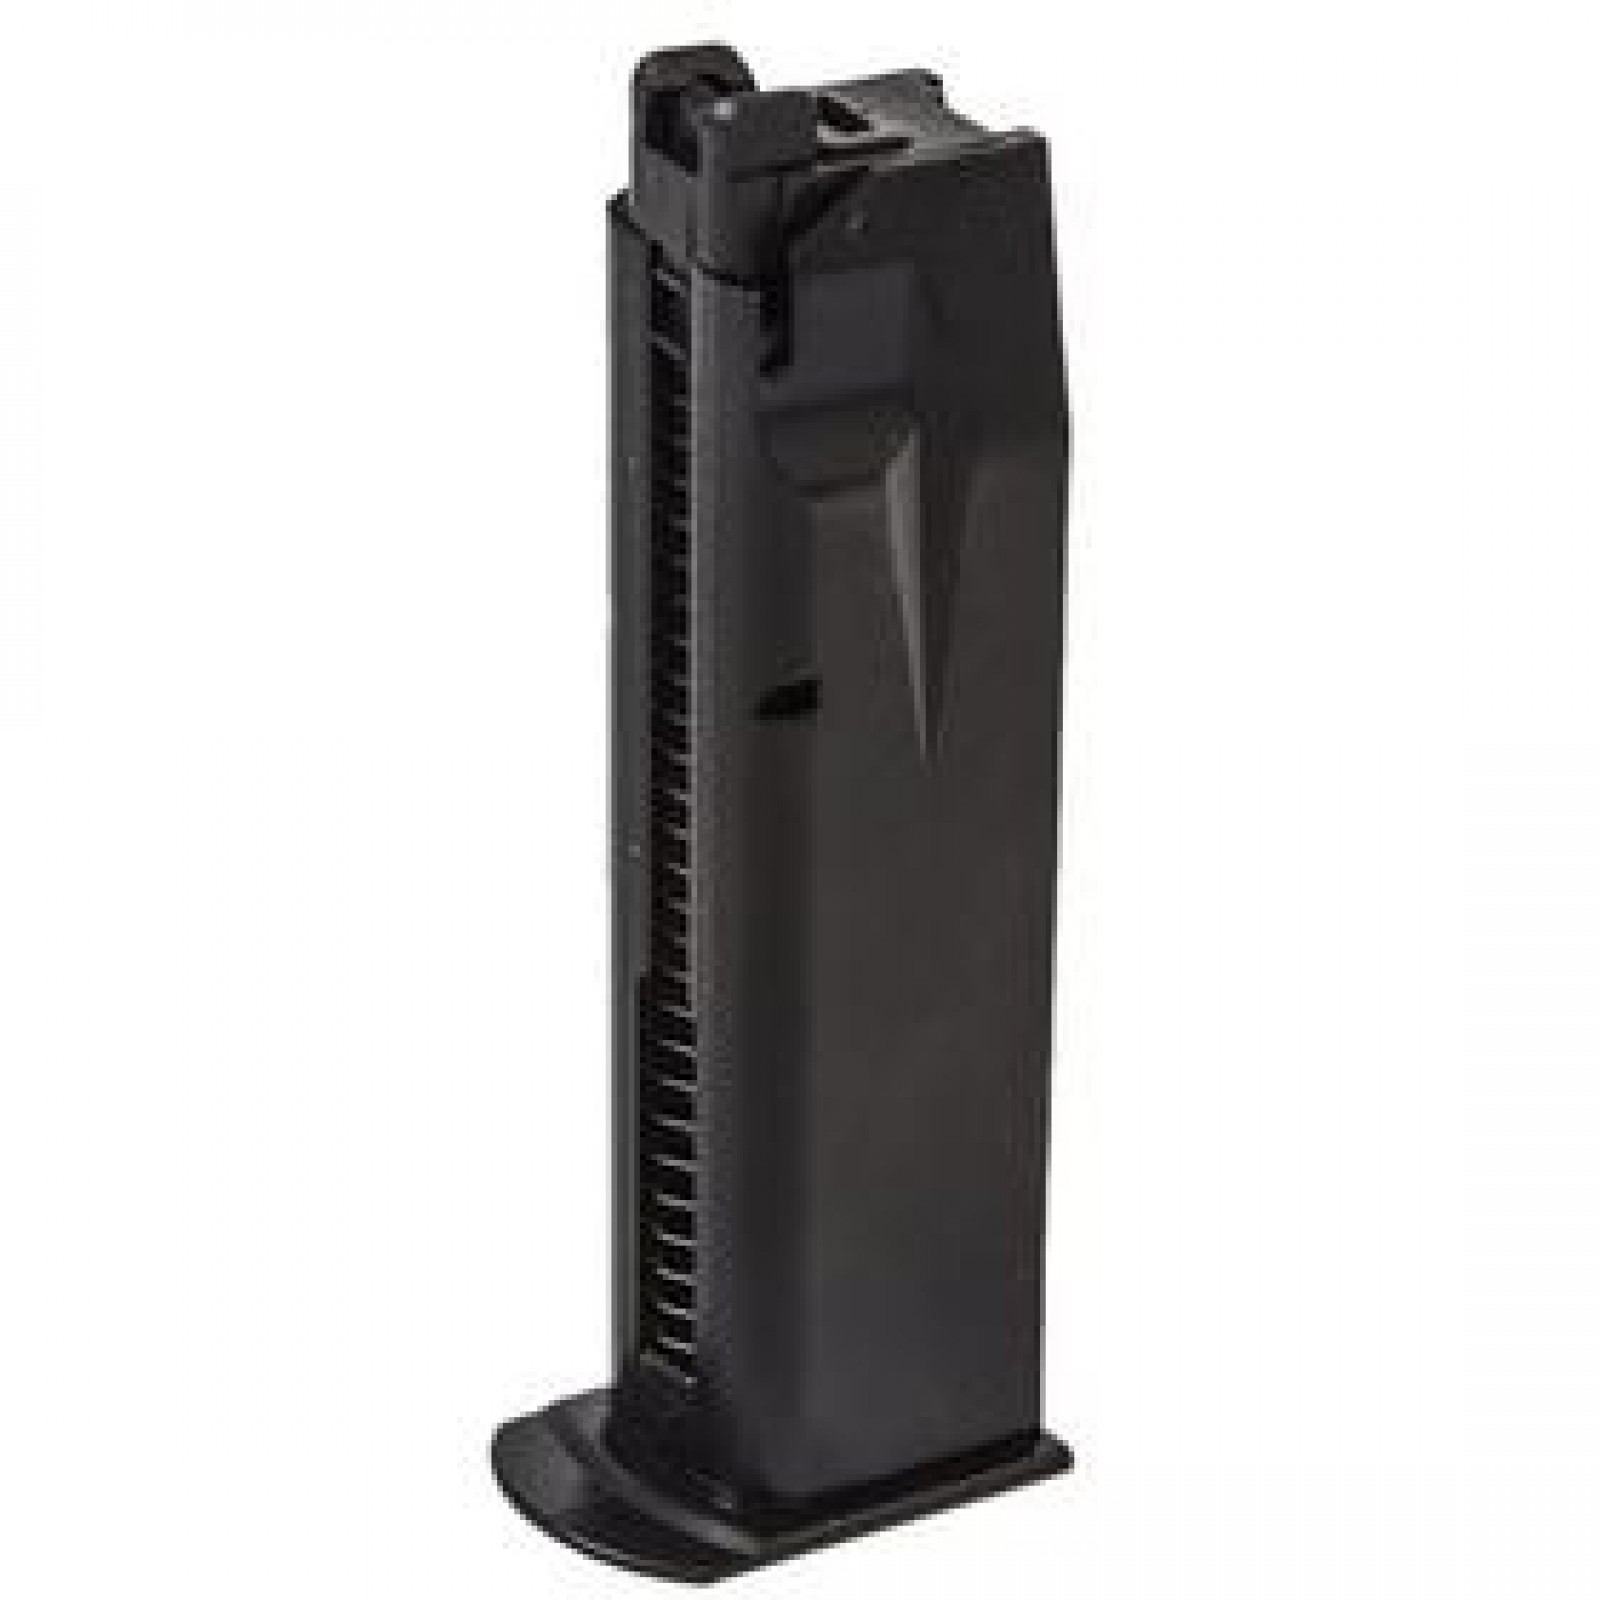 WE 25rds Airsoft Toy Gas Magazine For WE Marui F226 P226 E2 Series GBB Black 033 